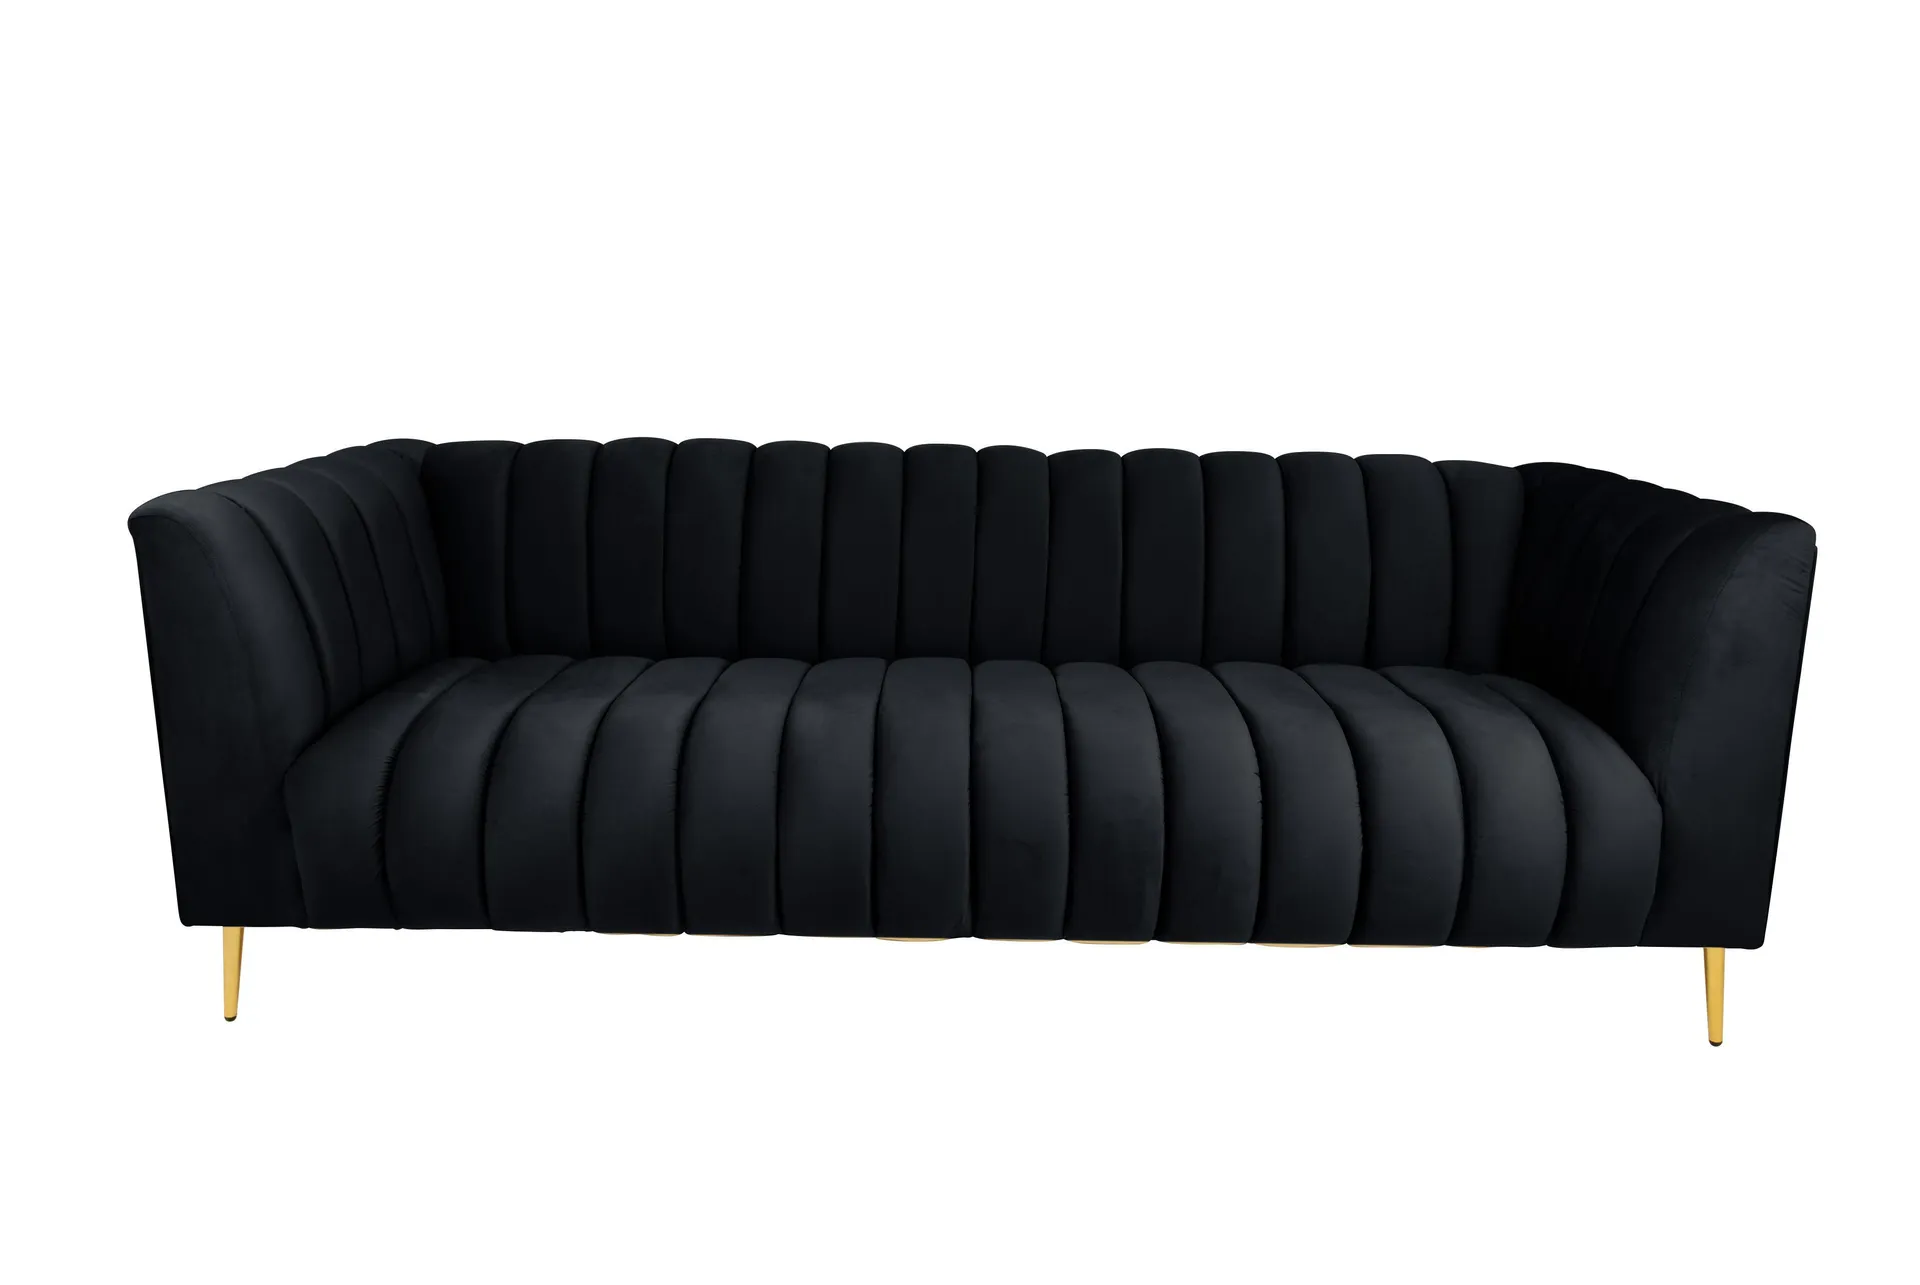 Zoey 3 Seater Stripe Couch - Black